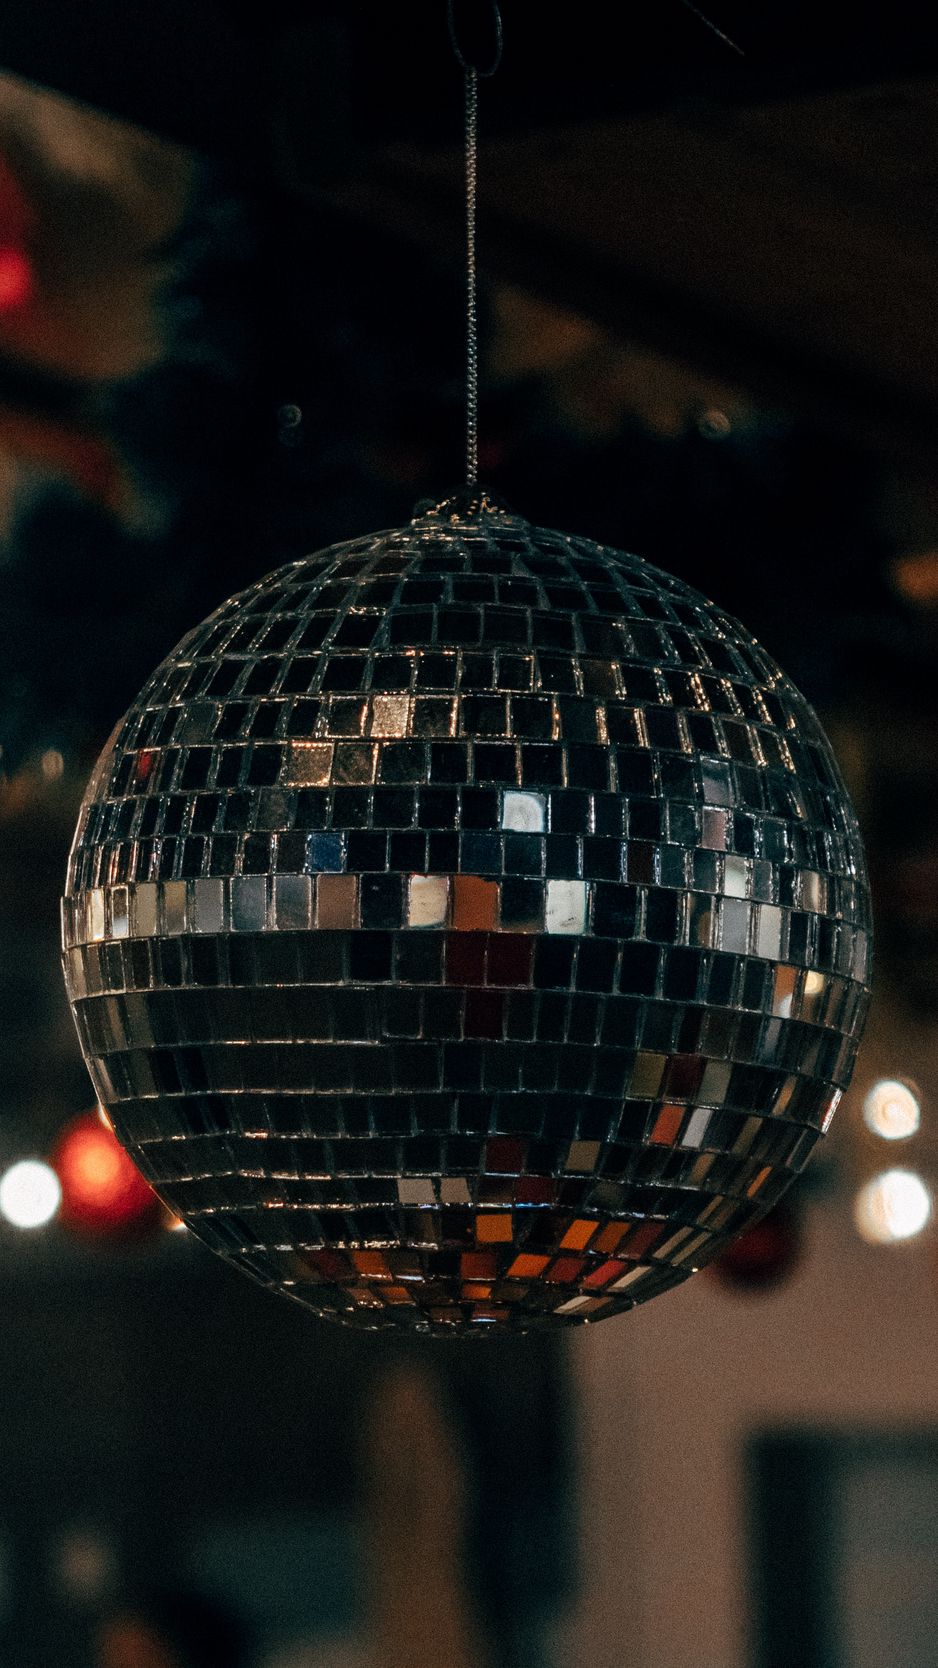 Download wallpaper 938x1668 disco, ball, mirror, sphere, glare iphone  8/7/6s/6 for parallax hd background